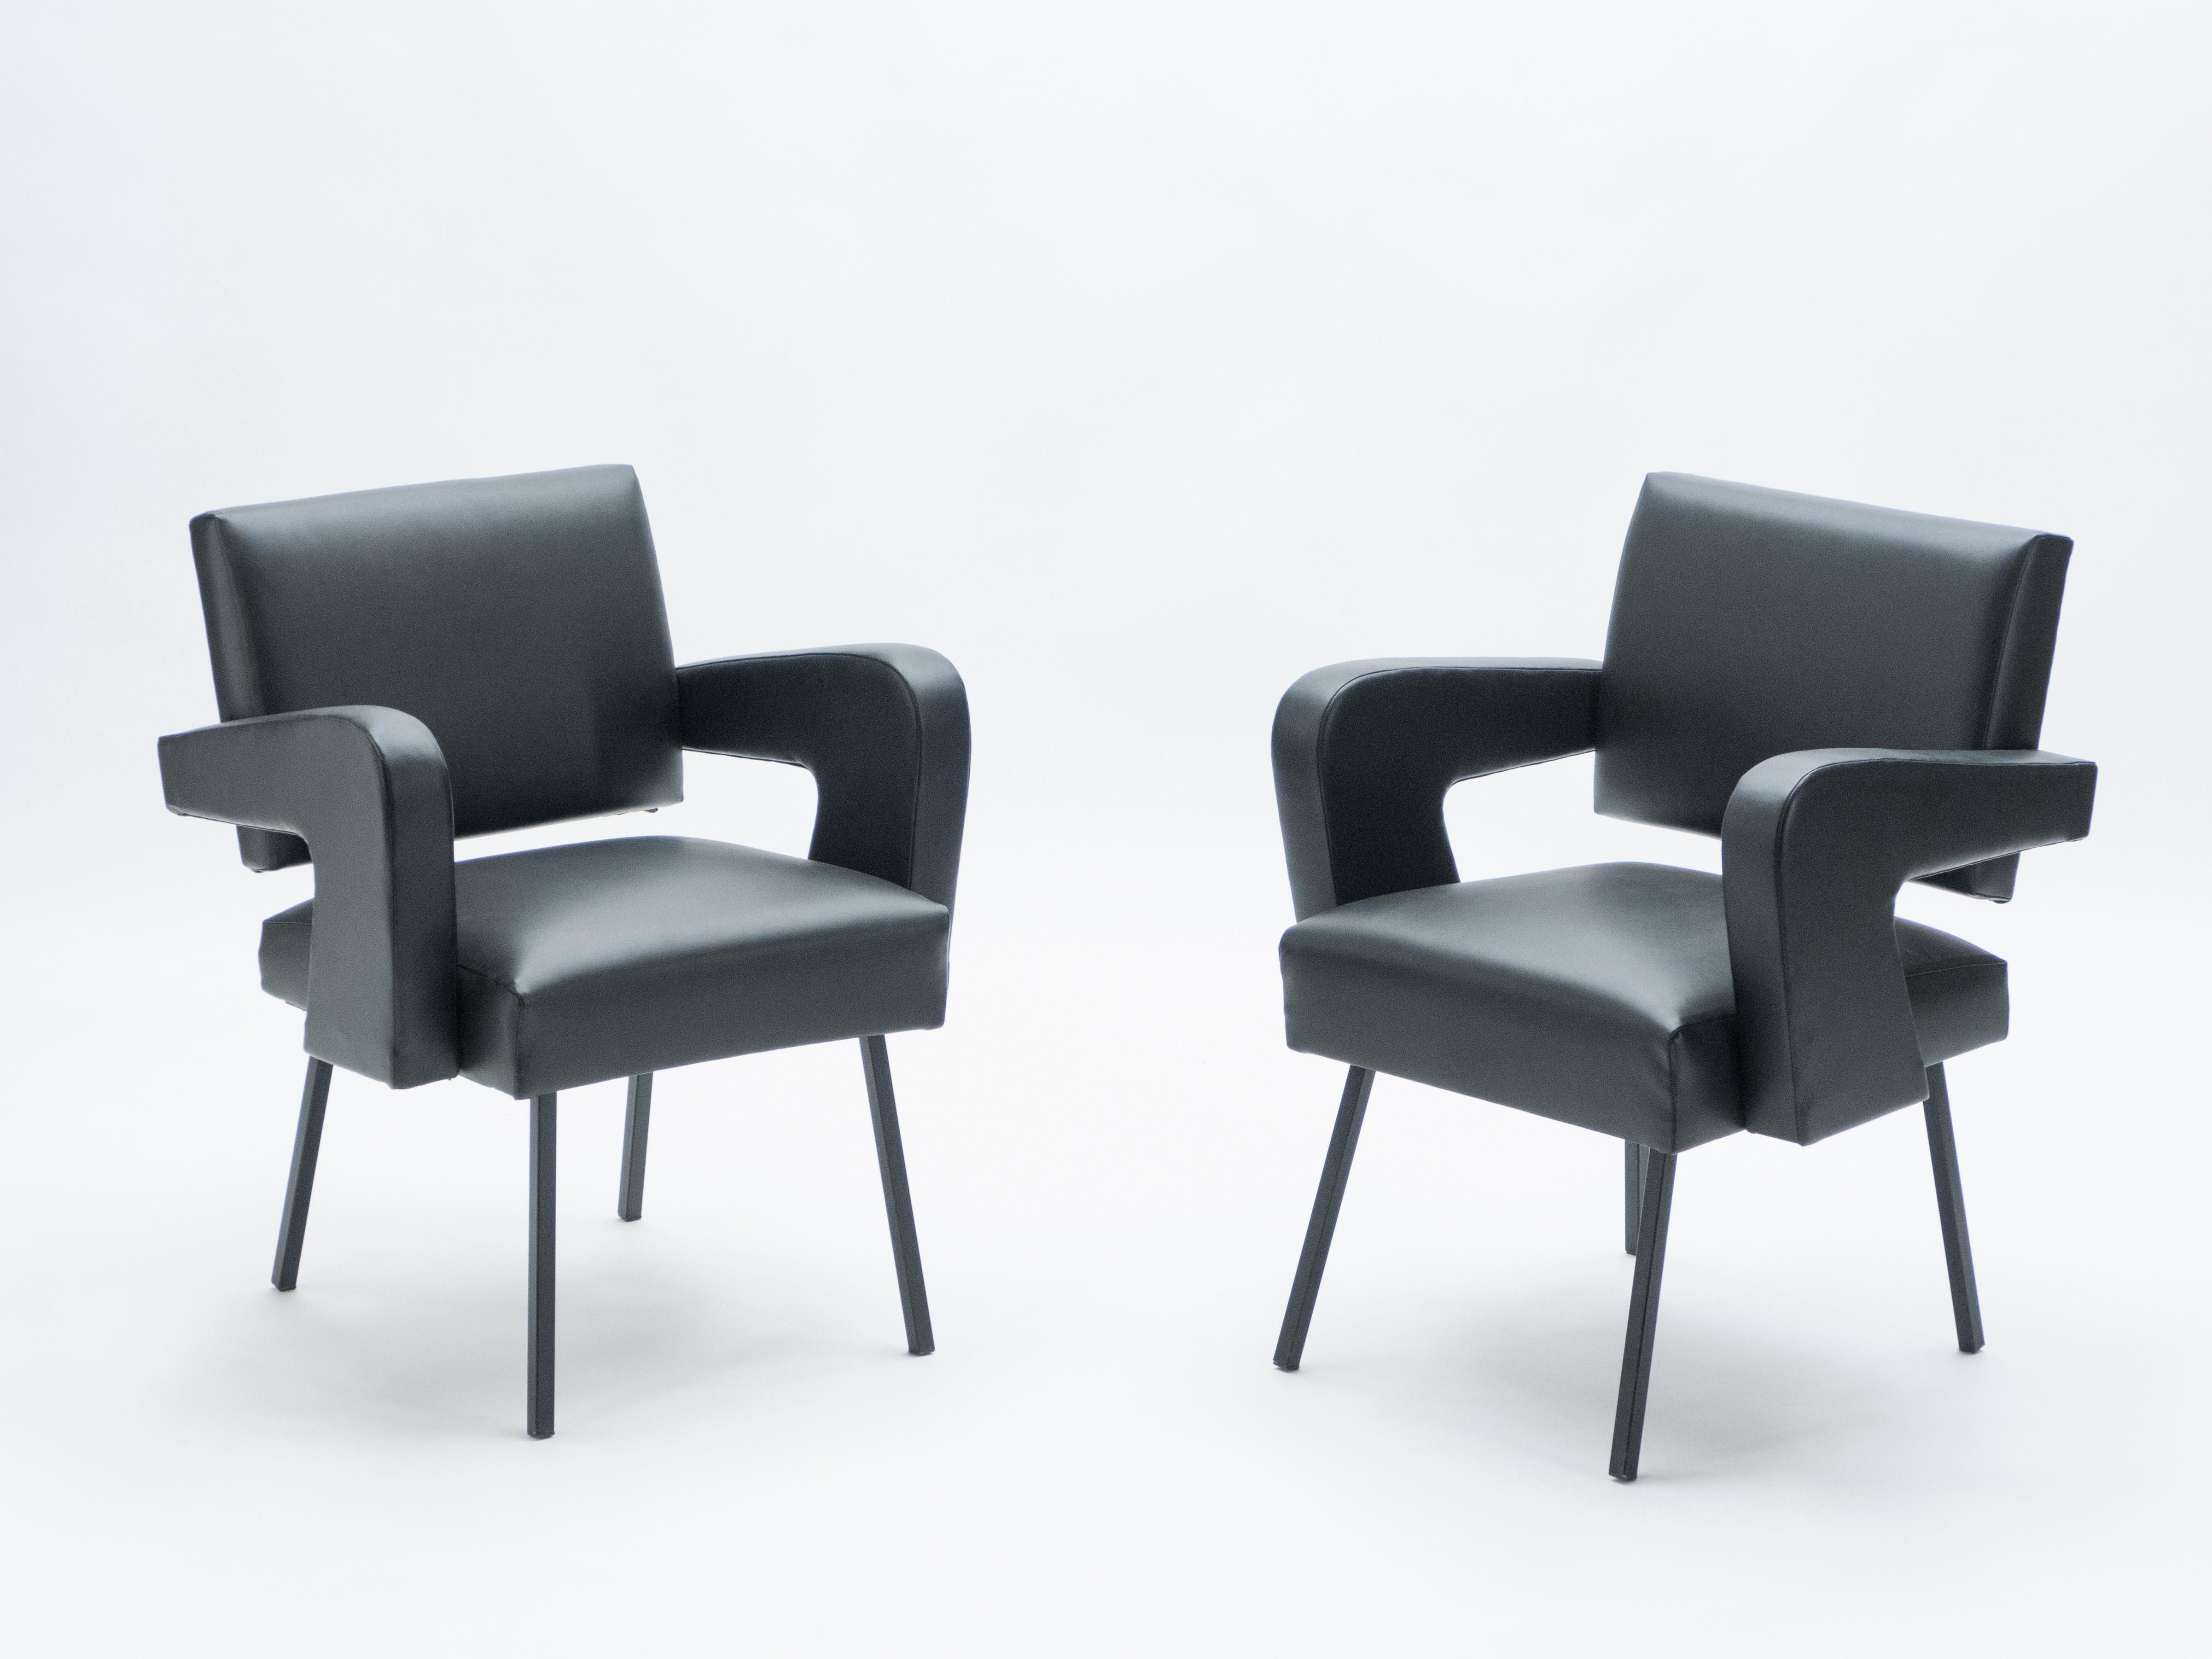 This set of armchairs named President designed in 1959 by French designer Jacques Adnet are a rare, exciting find. Upholstered in high-quality leatherette, the chairs are emblematic of Adnet’s philosophies in furniture design. They’re exceedingly